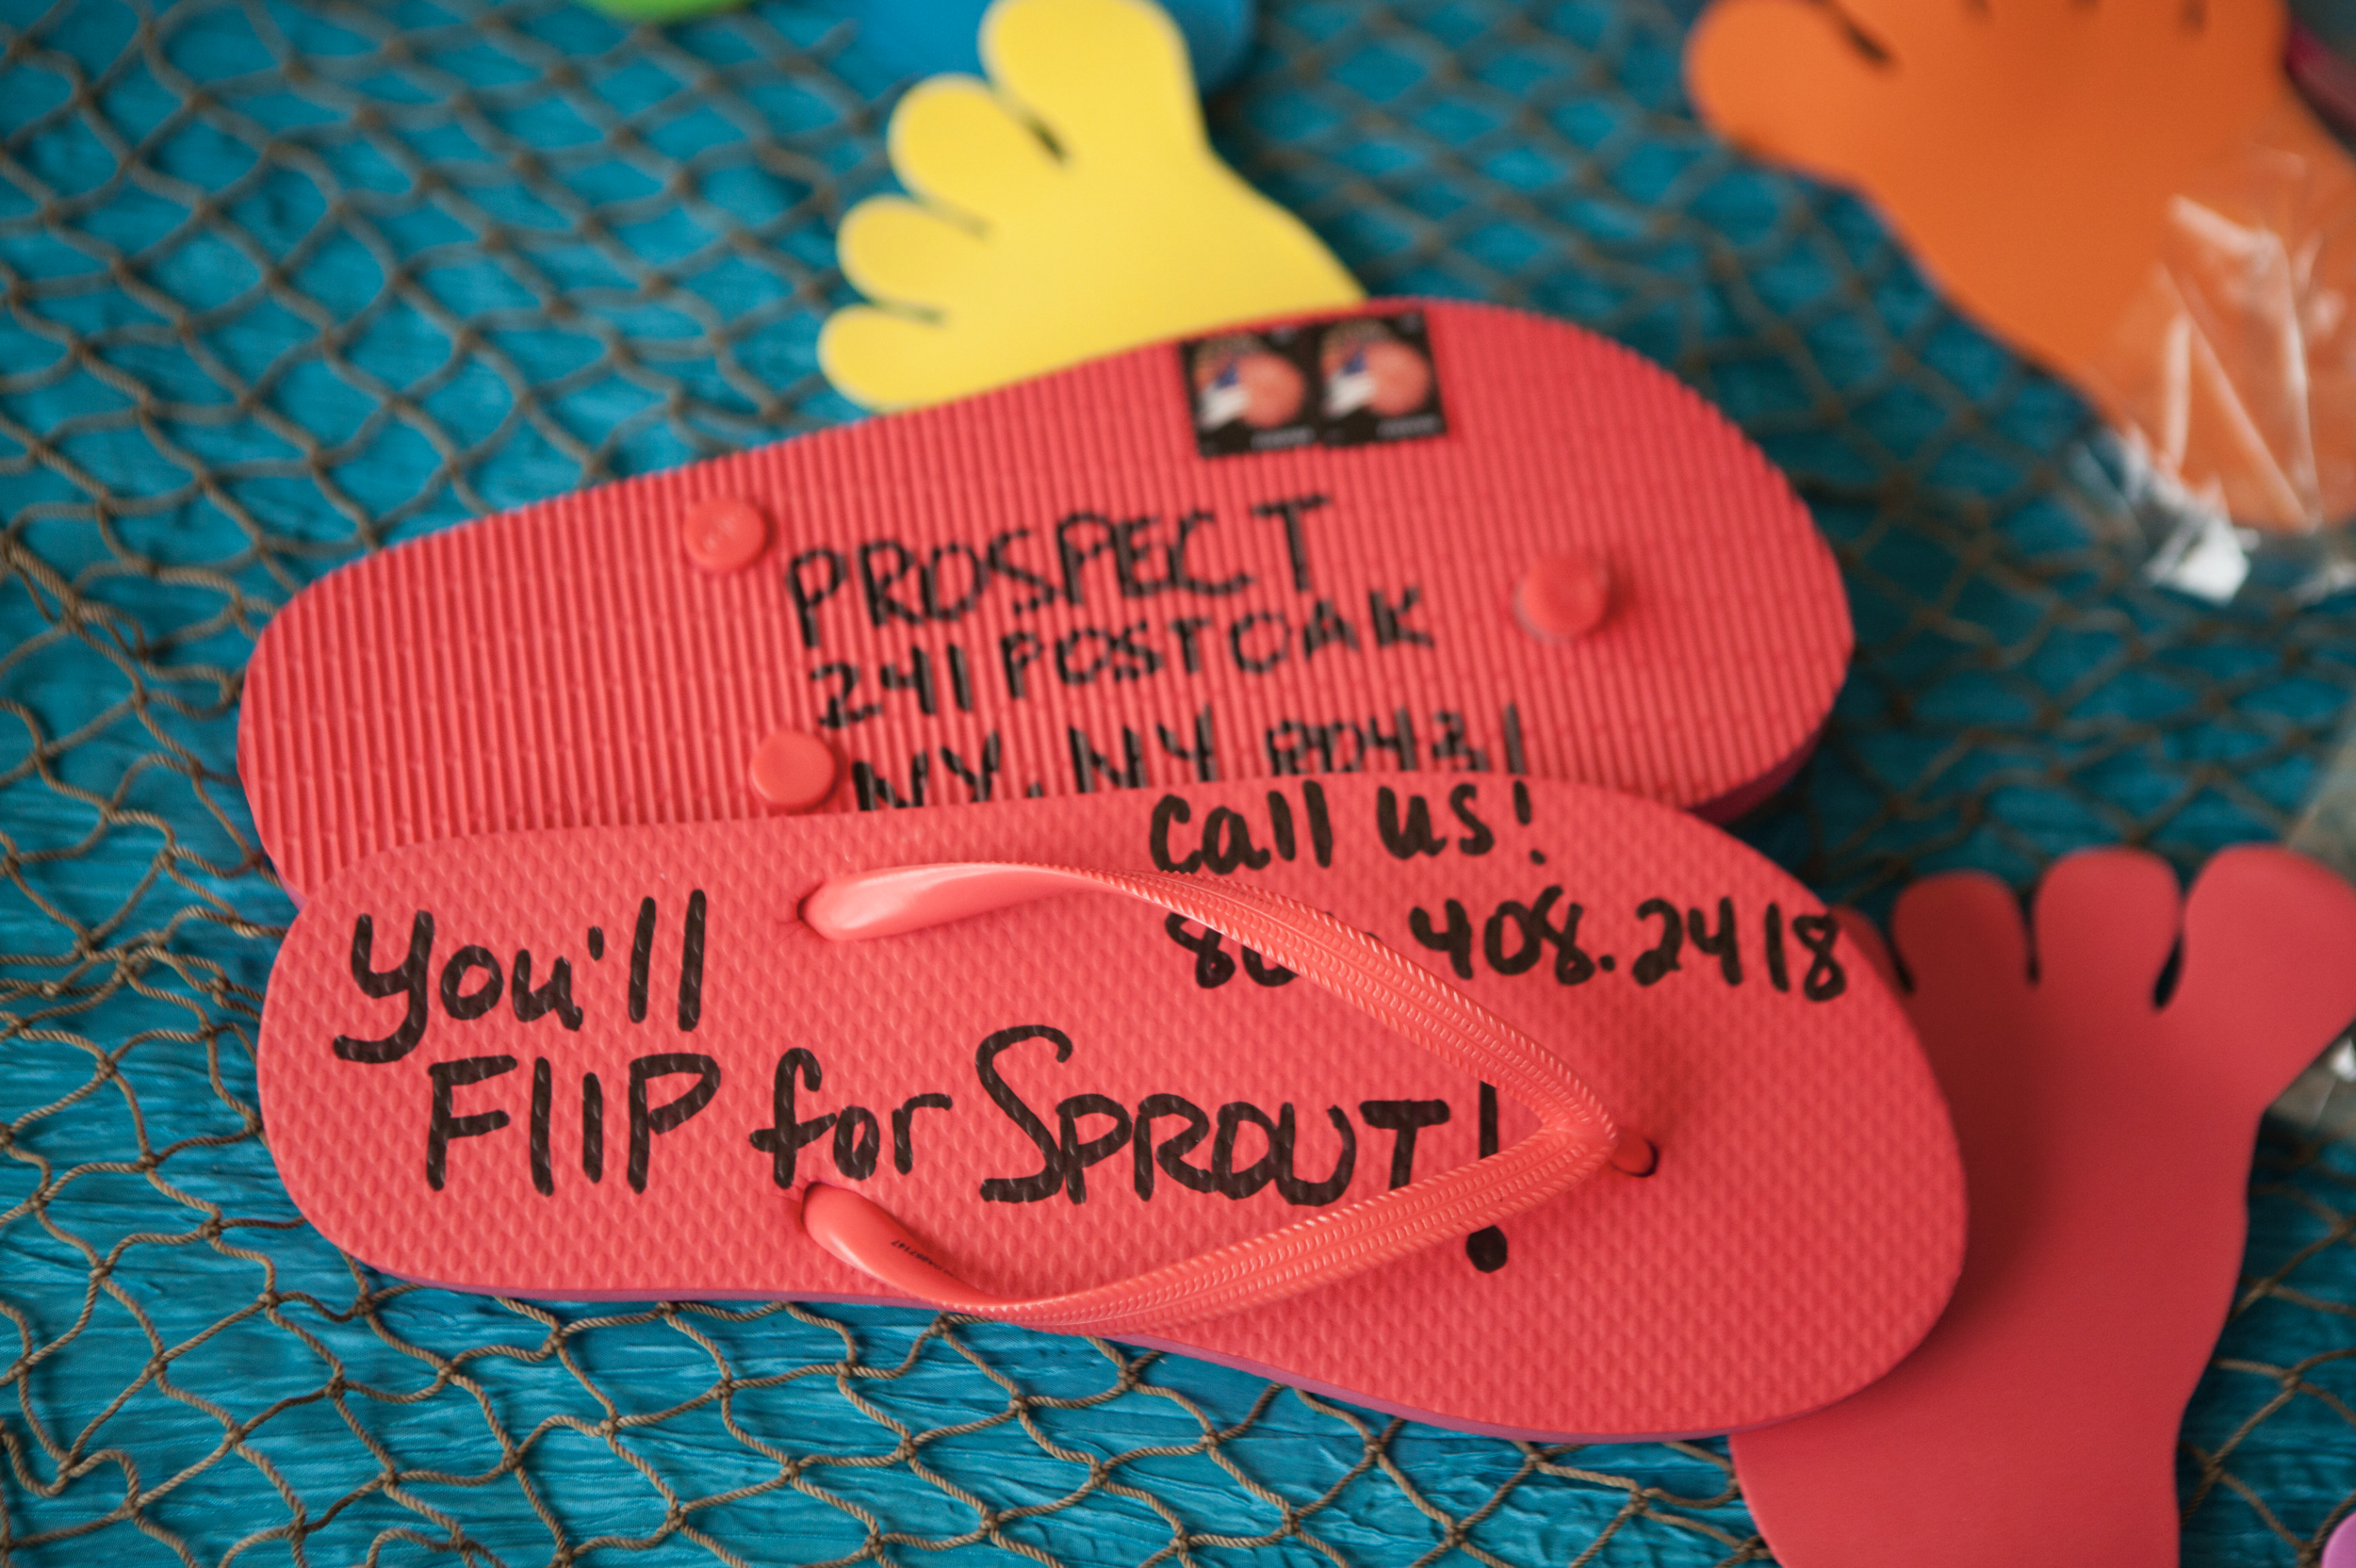 Flip flop with Marketing Slogan, Address, and Stamps to Mail Directly